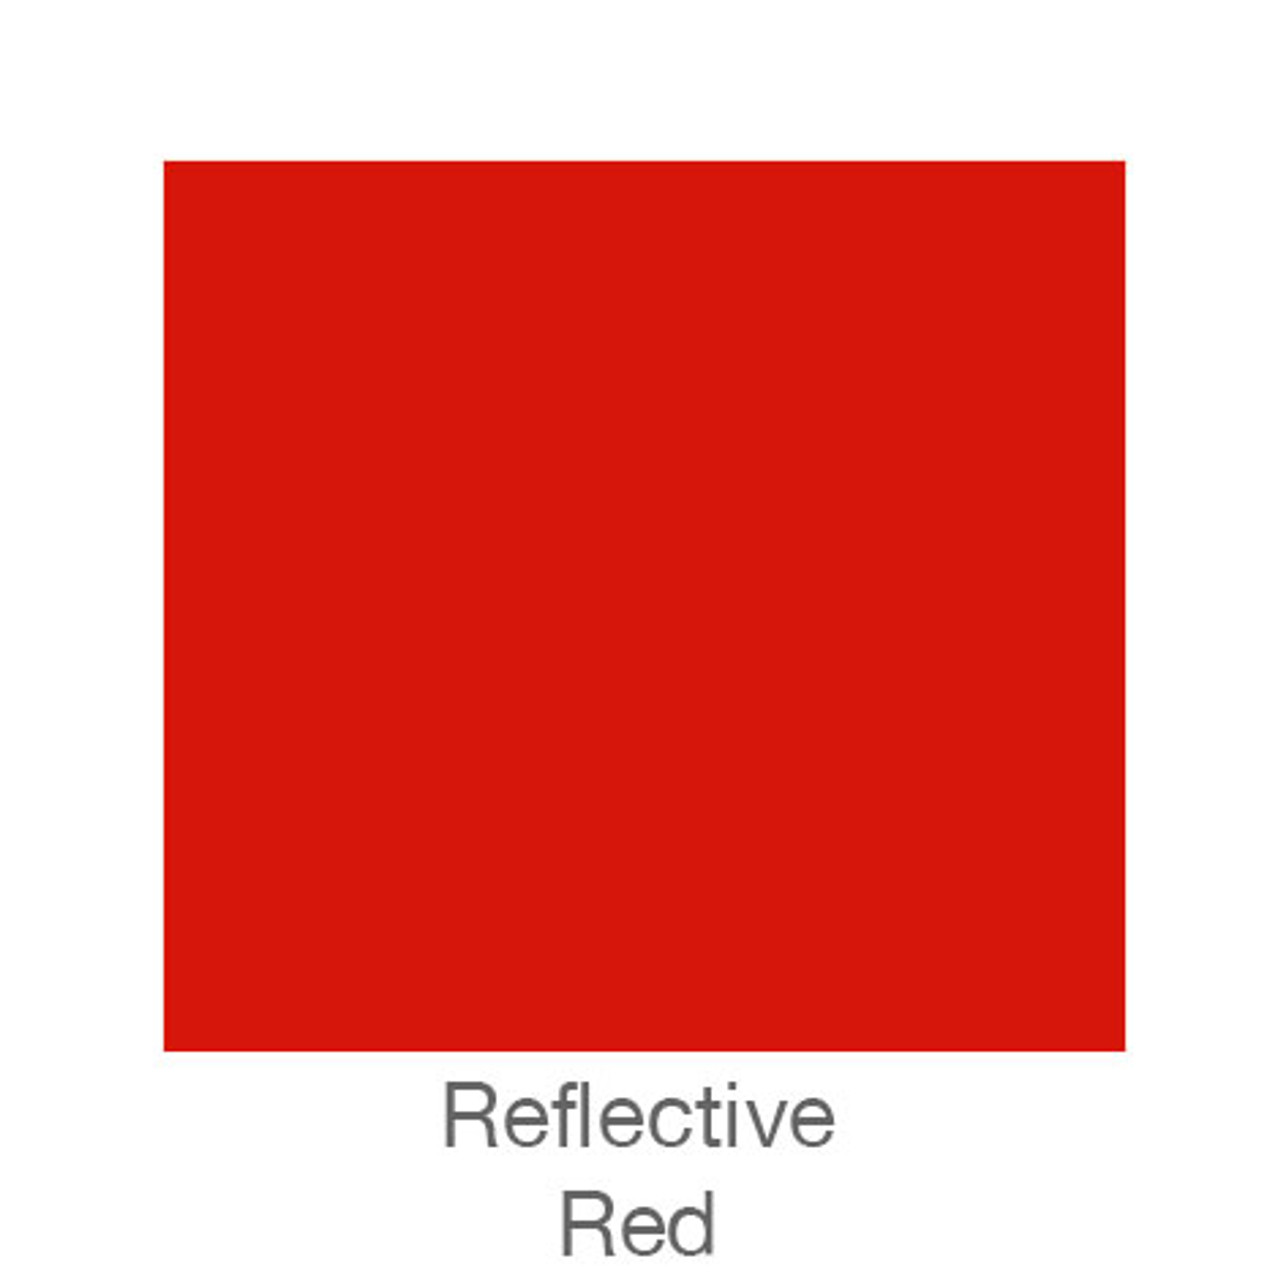  Red Reflective Vinyl Permanent Adhesive, 12 x 4FT Reflective  Vinyl for Cricut, Cars, Bikes, Decals, Street Signs, Helmets, Mailbox,  Reflective Tape, Turner Moore Edition (12 x 48, Engineering Red) : Arts